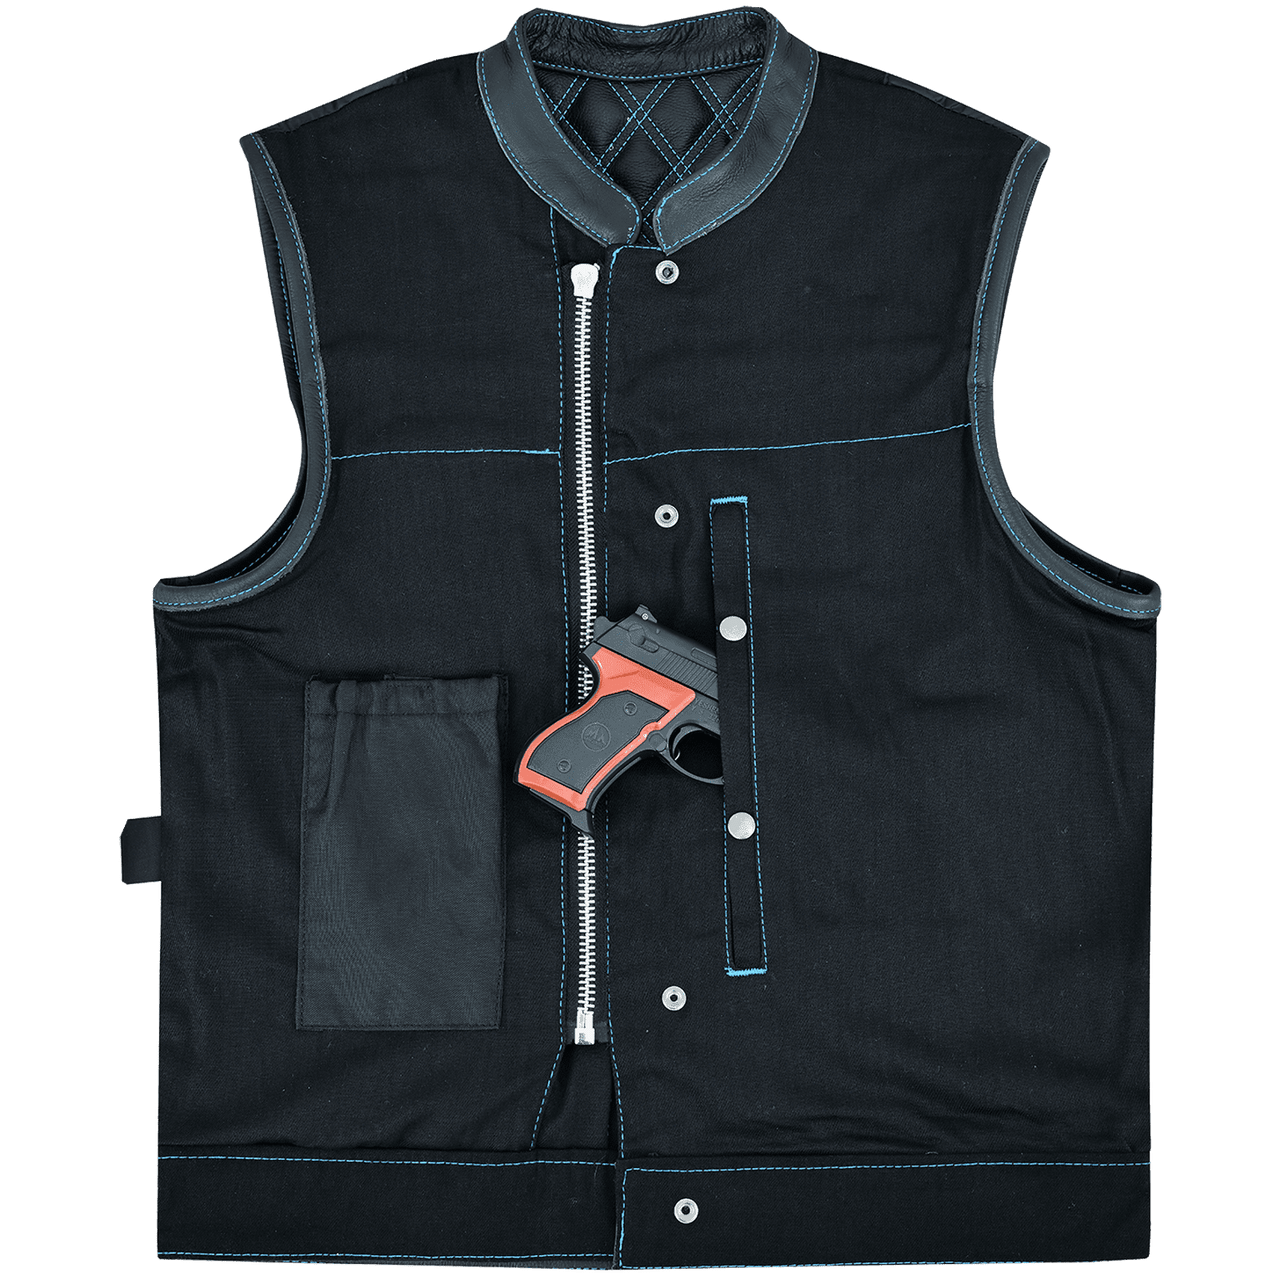 Vance-Leathers-VB924BL-Men's-Denim-Leather-Motorcycle-Vest-with-Blue-Stitching-conceal carry pocket